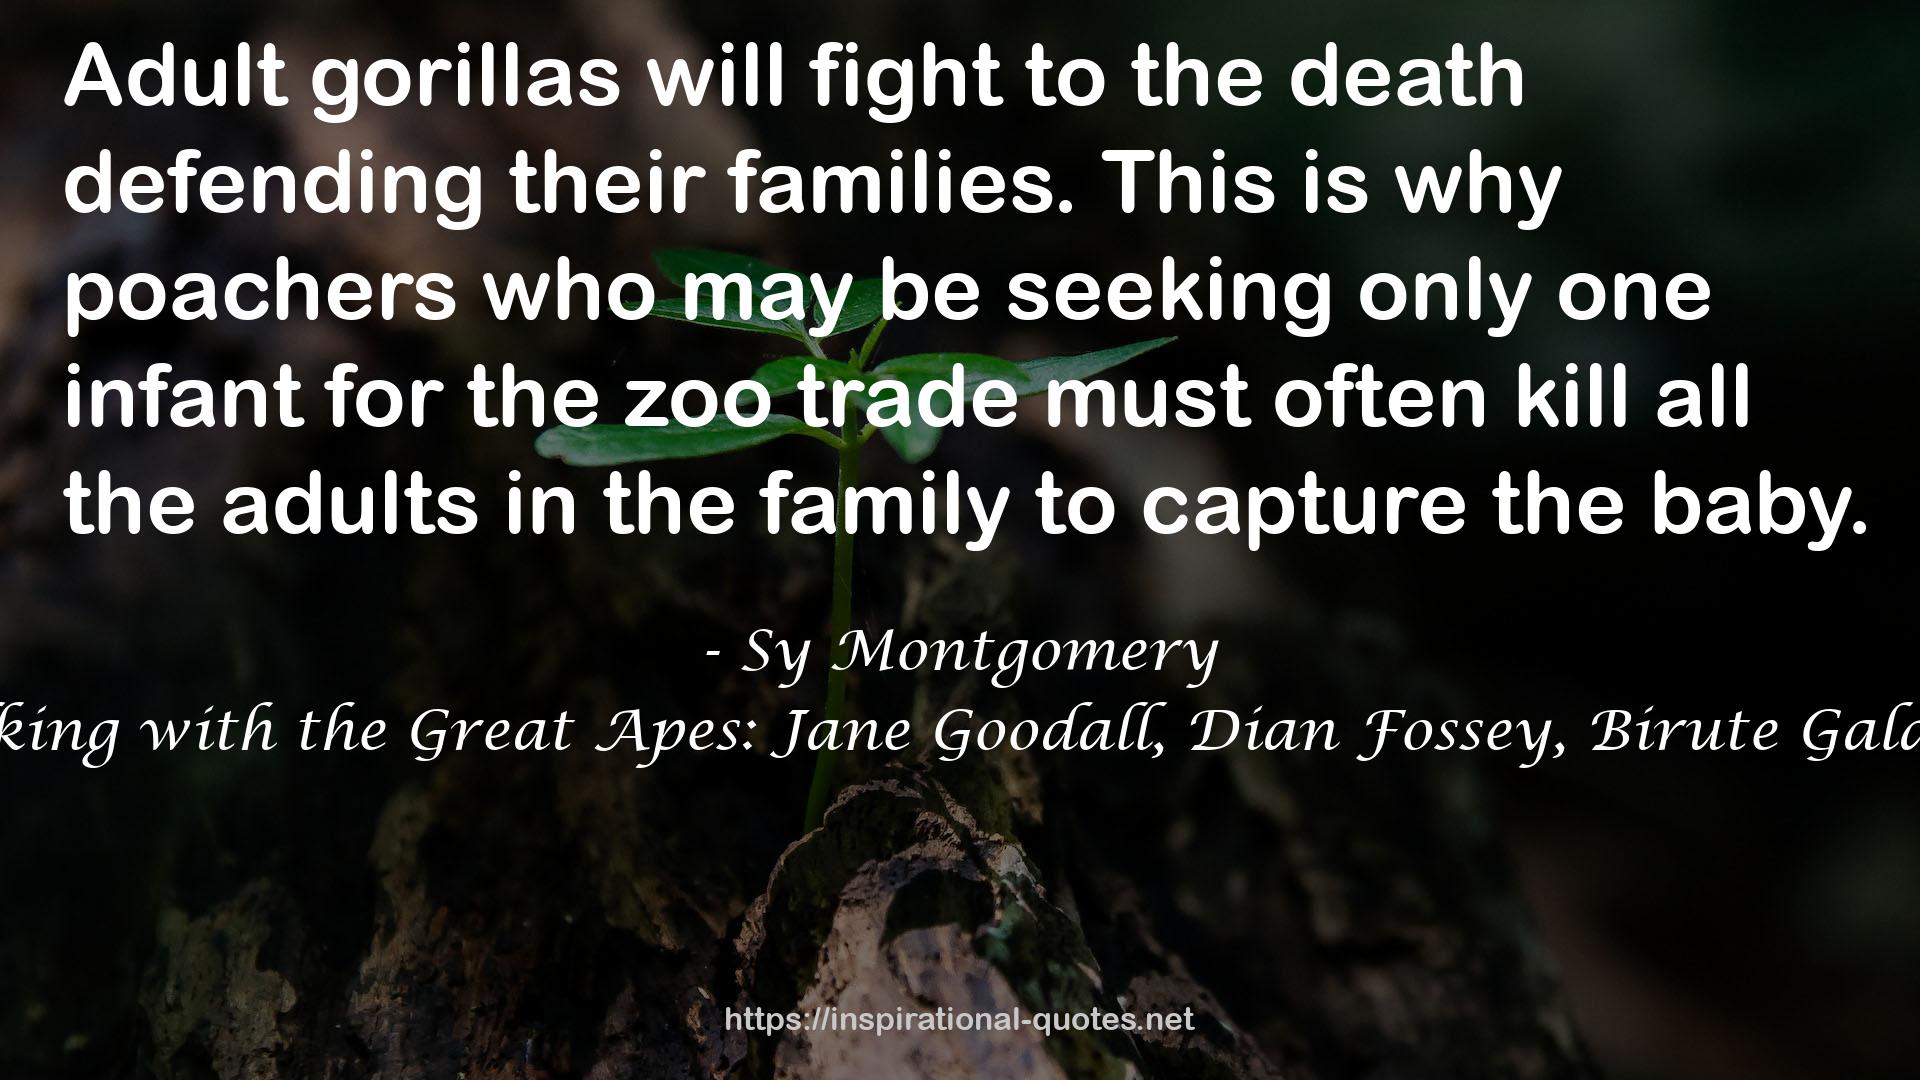 Walking with the Great Apes: Jane Goodall, Dian Fossey, Birute Galdikas QUOTES